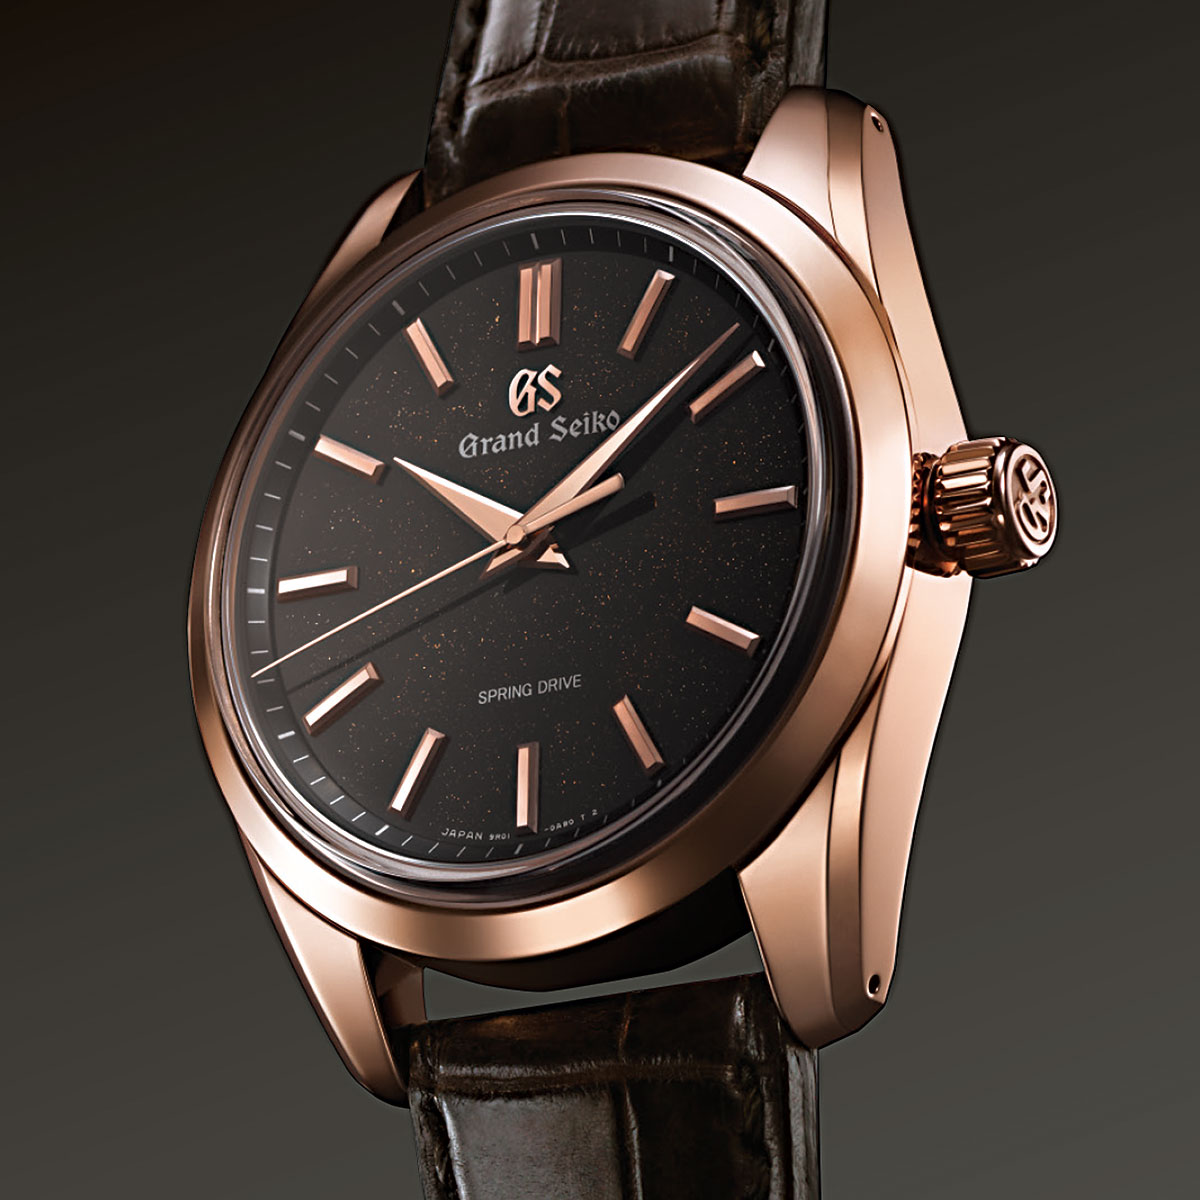 Inspired by Japan's Night Sky: Grand Seiko Spring Drive 8-Day Power Reserve  in Rose Gold | WatchTime - USA's  Watch Magazine